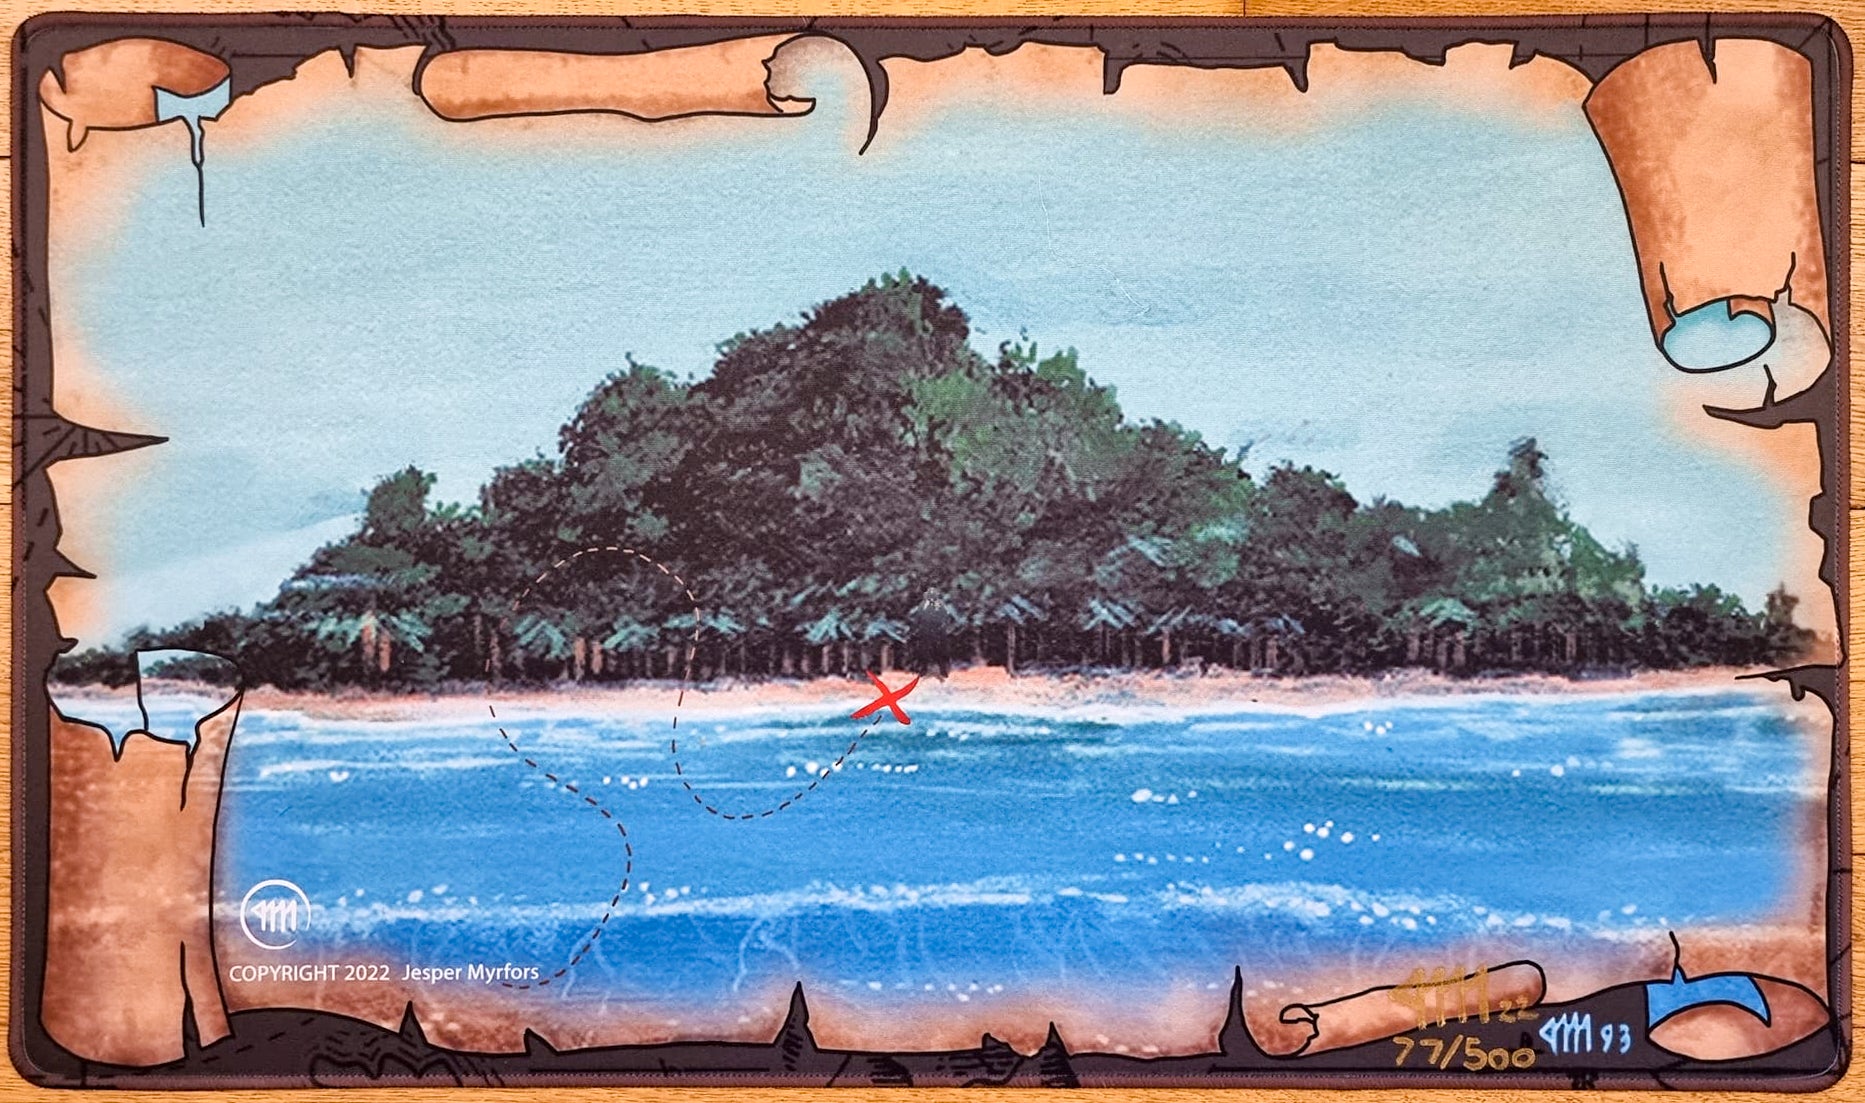 Tropical Island - Jesper Myrfors - Signed by the Artist - Limited Edition [500 Copies] - Embroidered - MTG Playmat